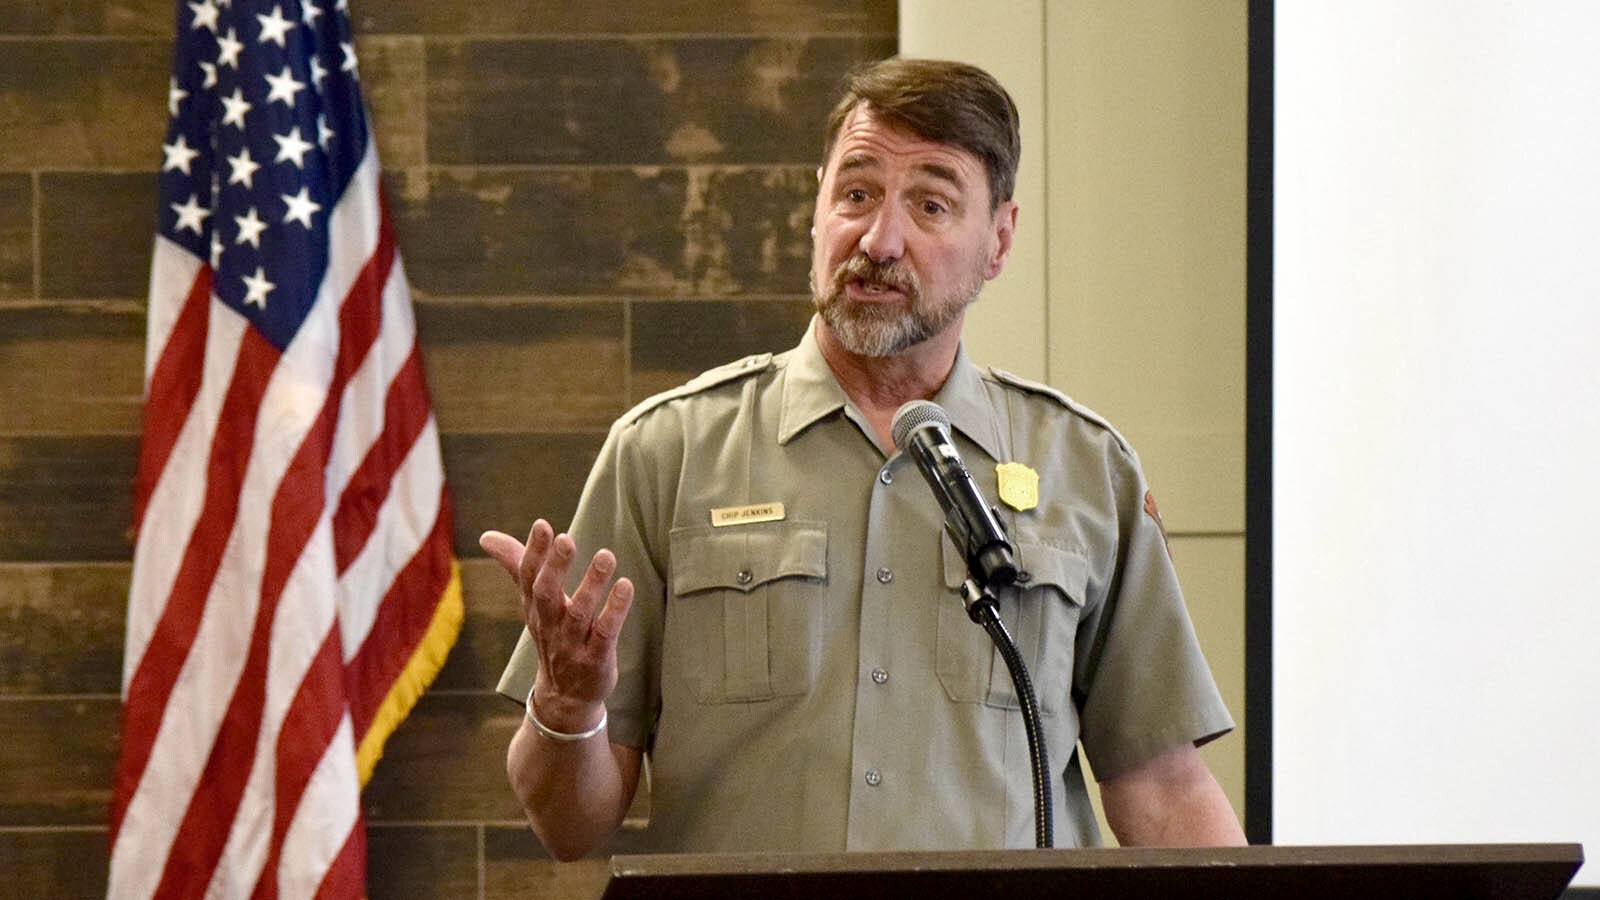 Grand Teton National Park Superintendent Chip Jenkins speaks Monday in Cody, Wyoming at a luncheon hosted by local tourism industry leaders.